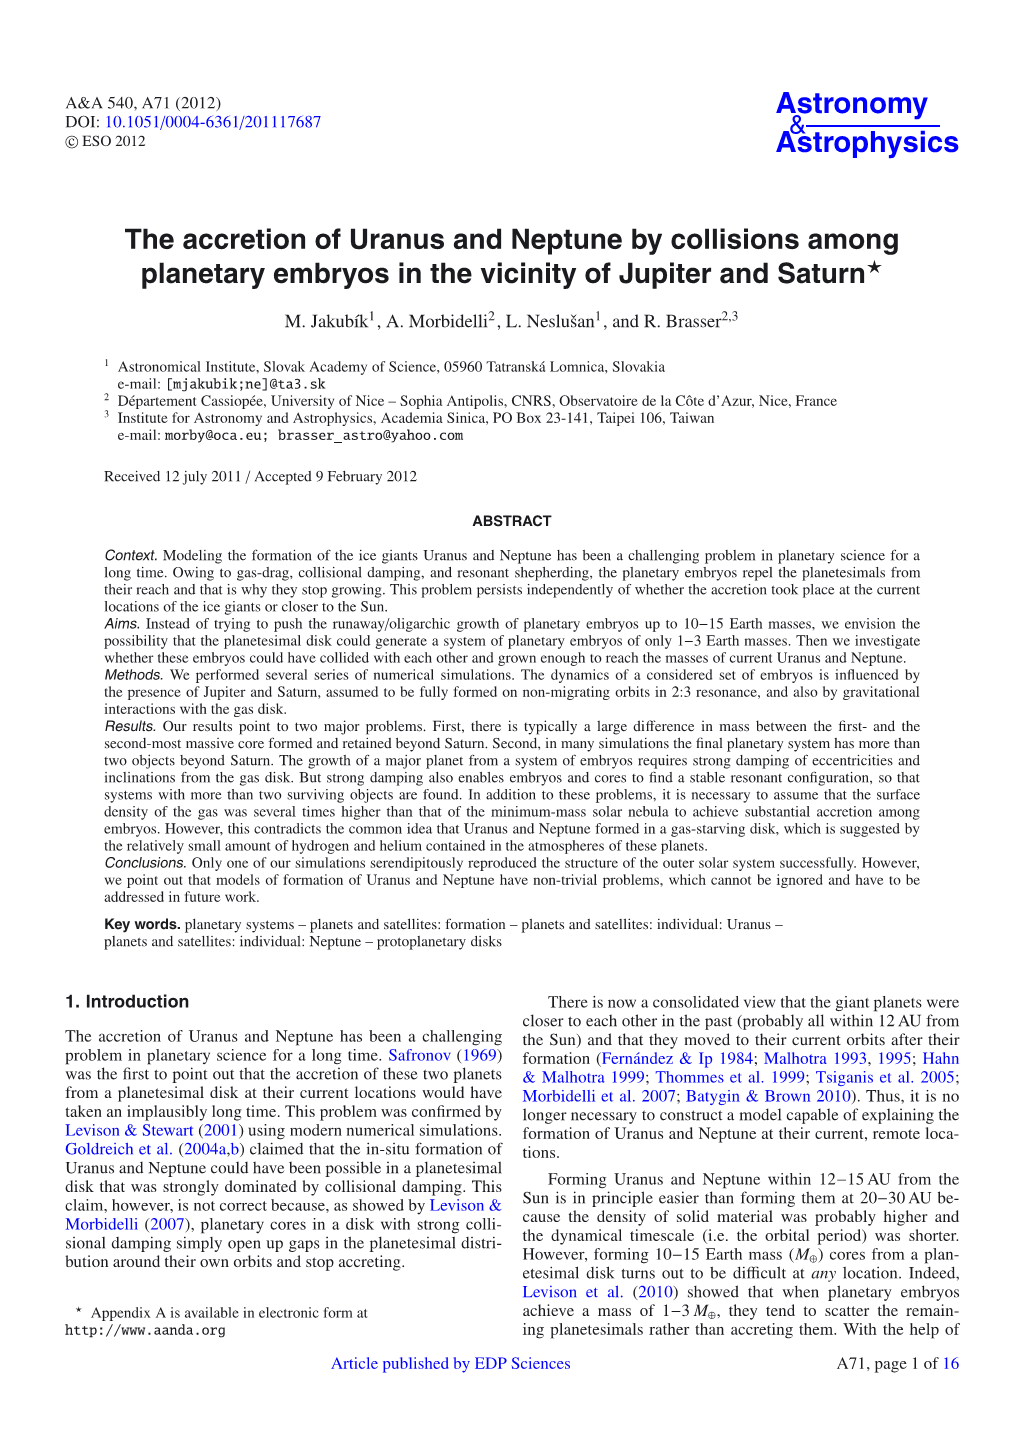 The Accretion of Uranus and Neptune by Collisions Among Planetary Embryos in the Vicinity of Jupiter and Saturn